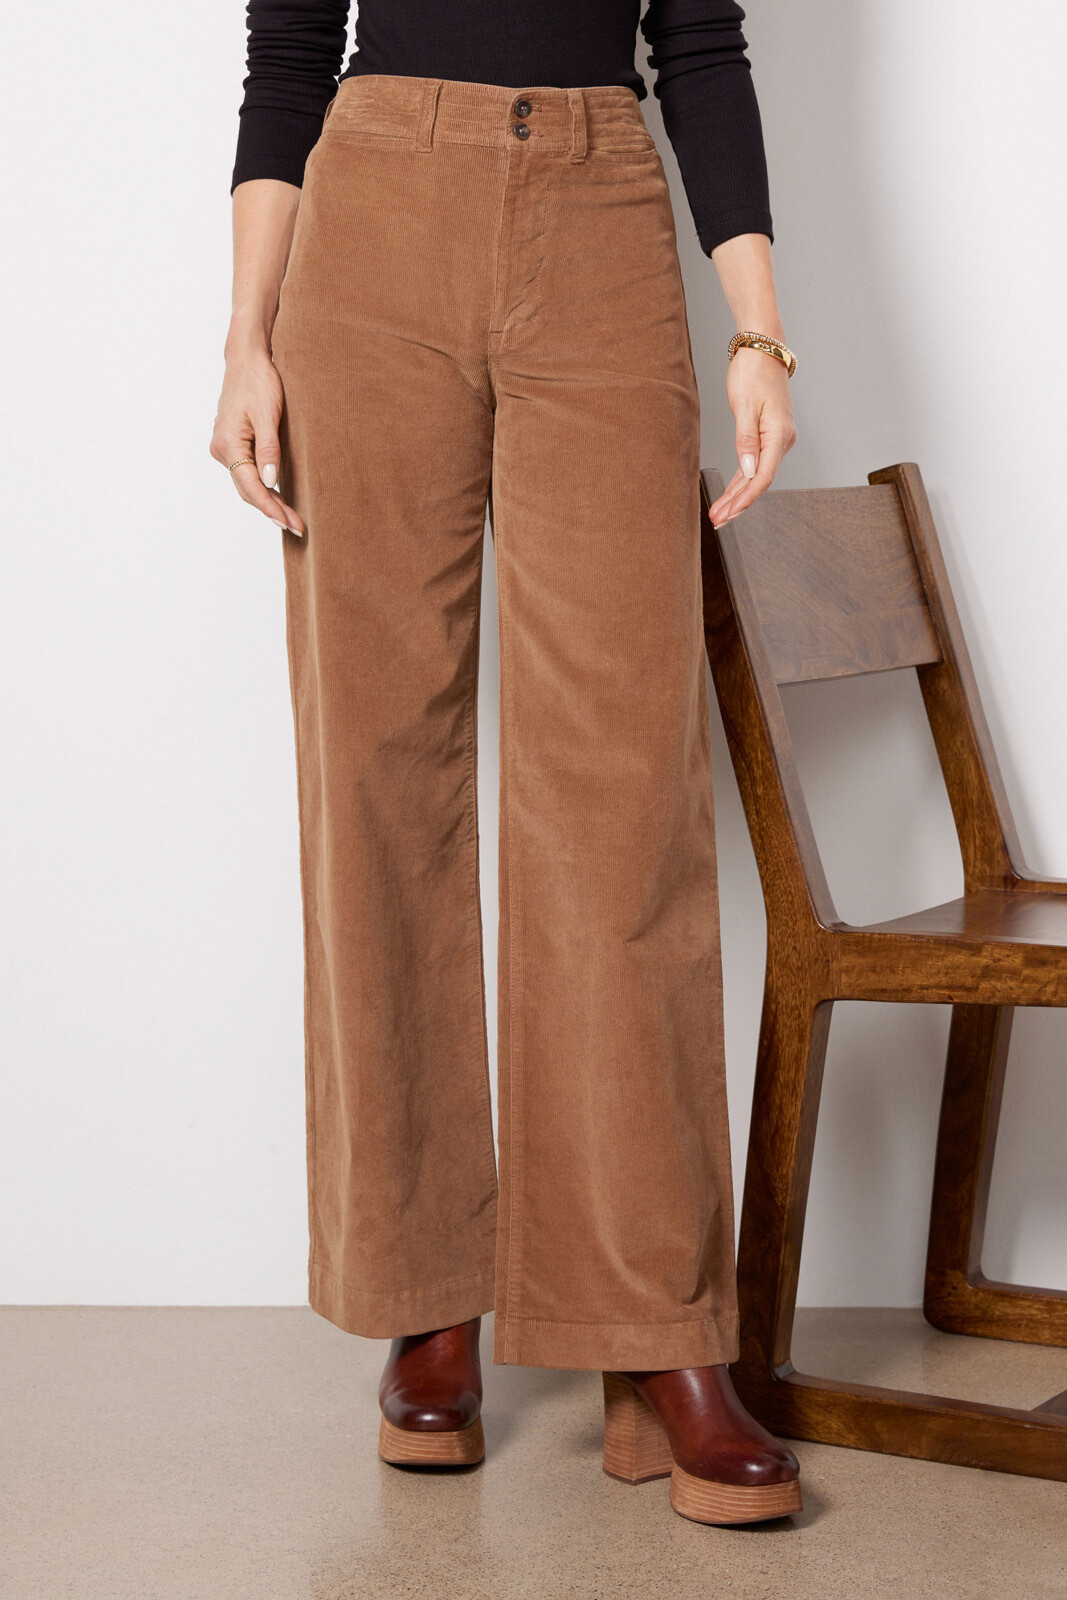 How to Style Wide Leg Corduroy Pants 